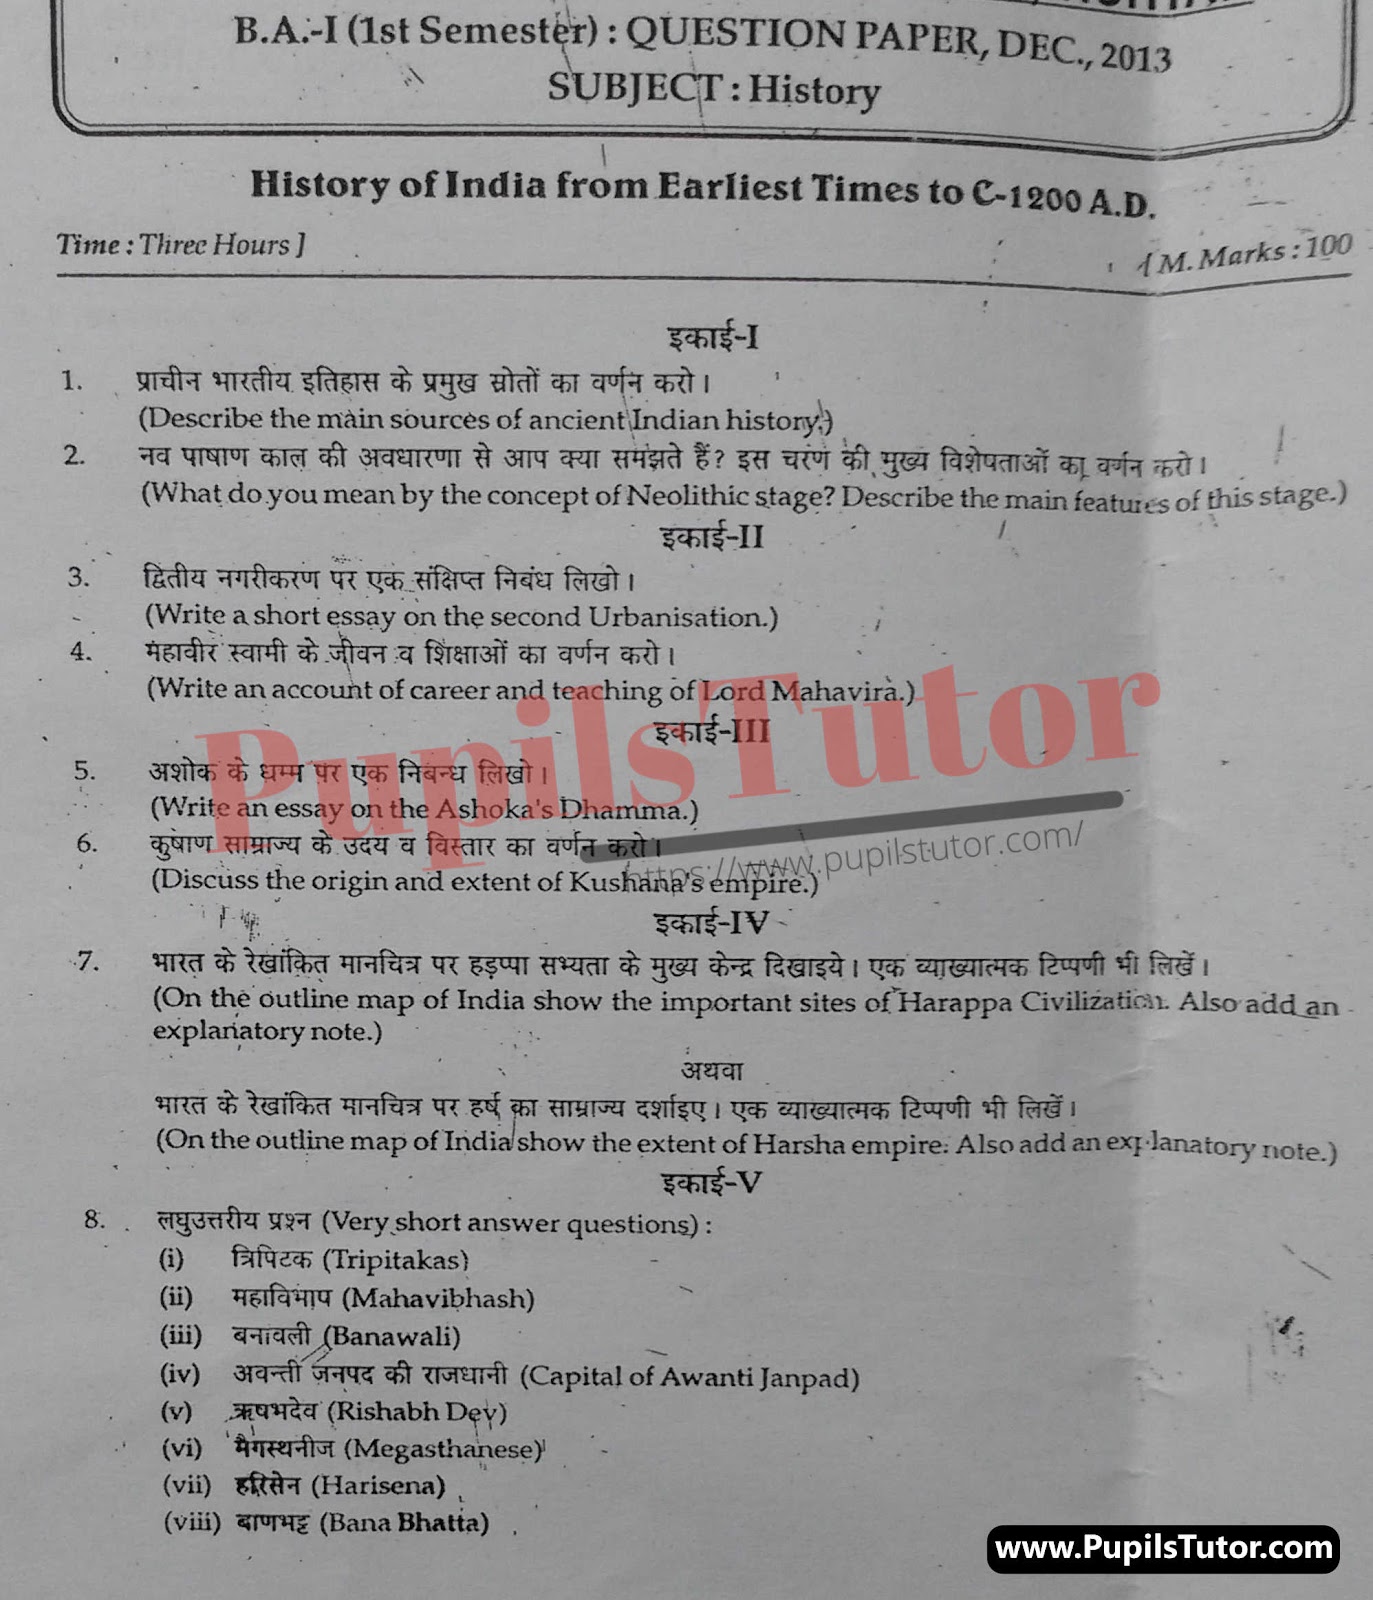 MDU (Maharshi Dayanand University, Rohtak Haryana) BA Regular Exam First Semester Previous Year History Question Paper For December, 2013 Exam (Question Paper Page 1) - pupilstutor.com